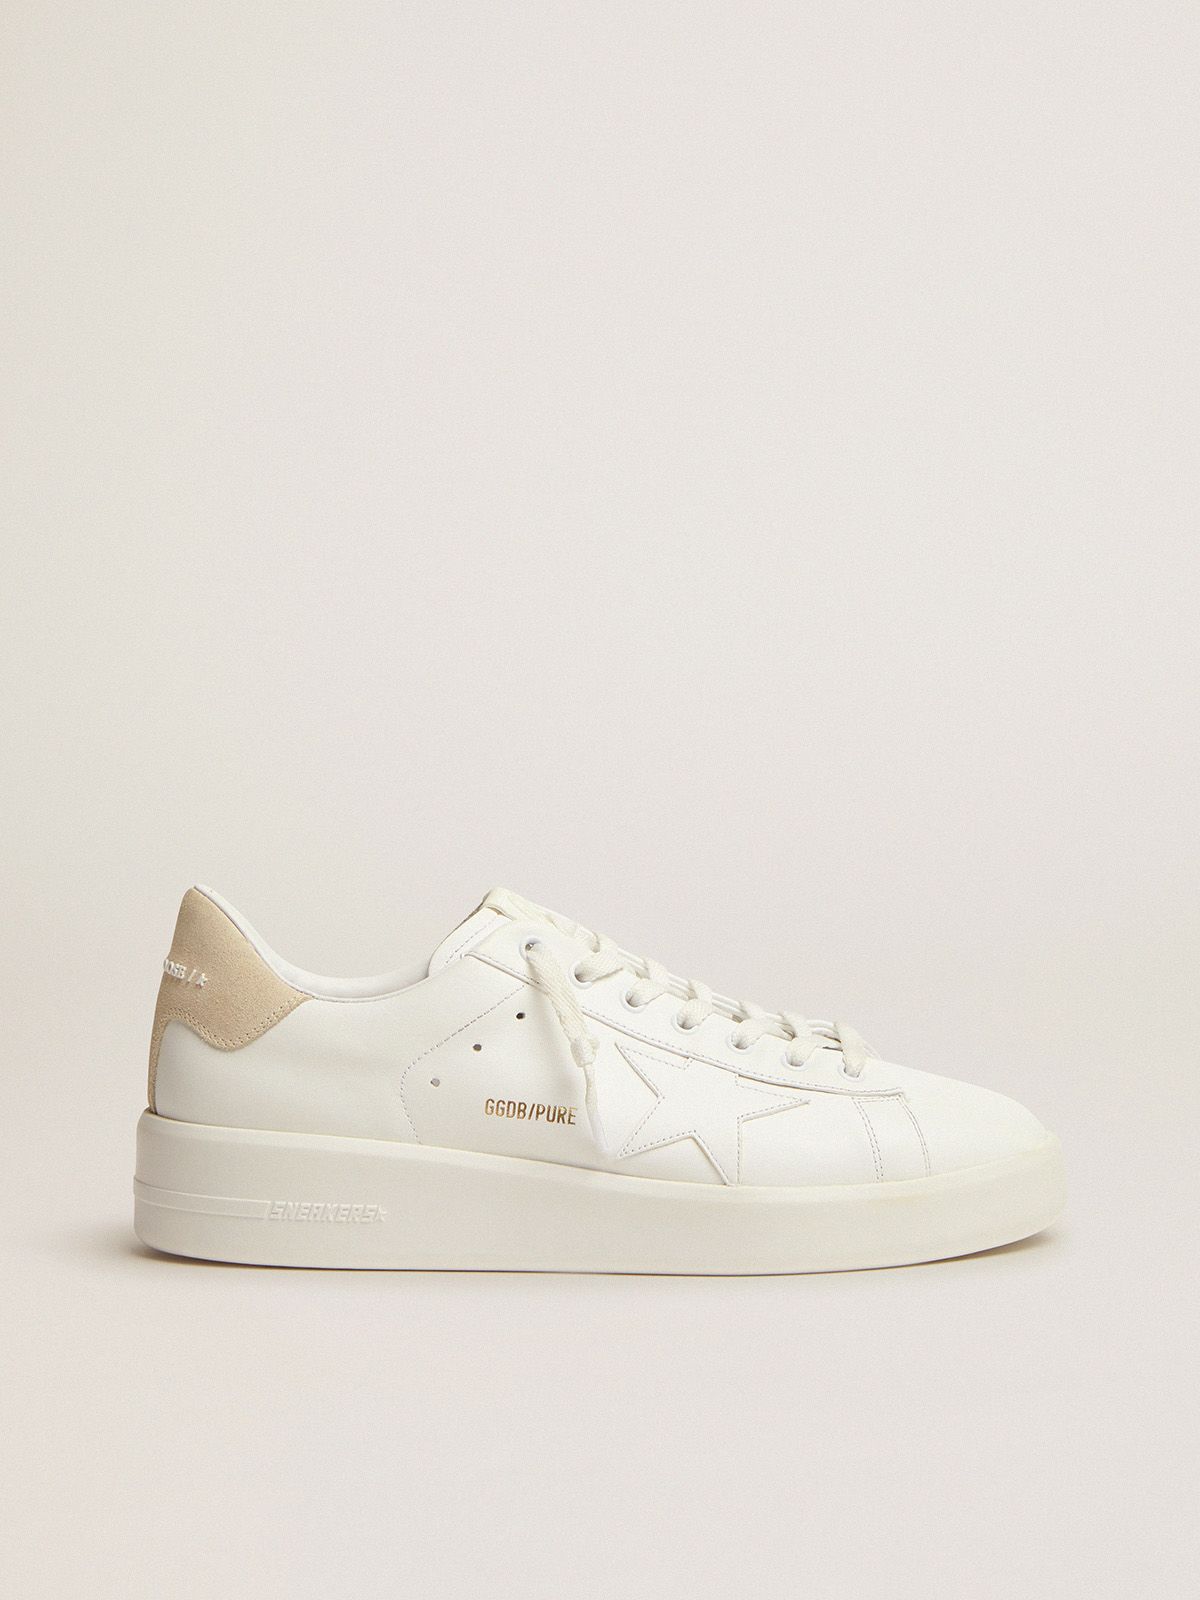 Golden Goose Sconti Uomo Purestar sneakers in white leather with cream suede heel tab